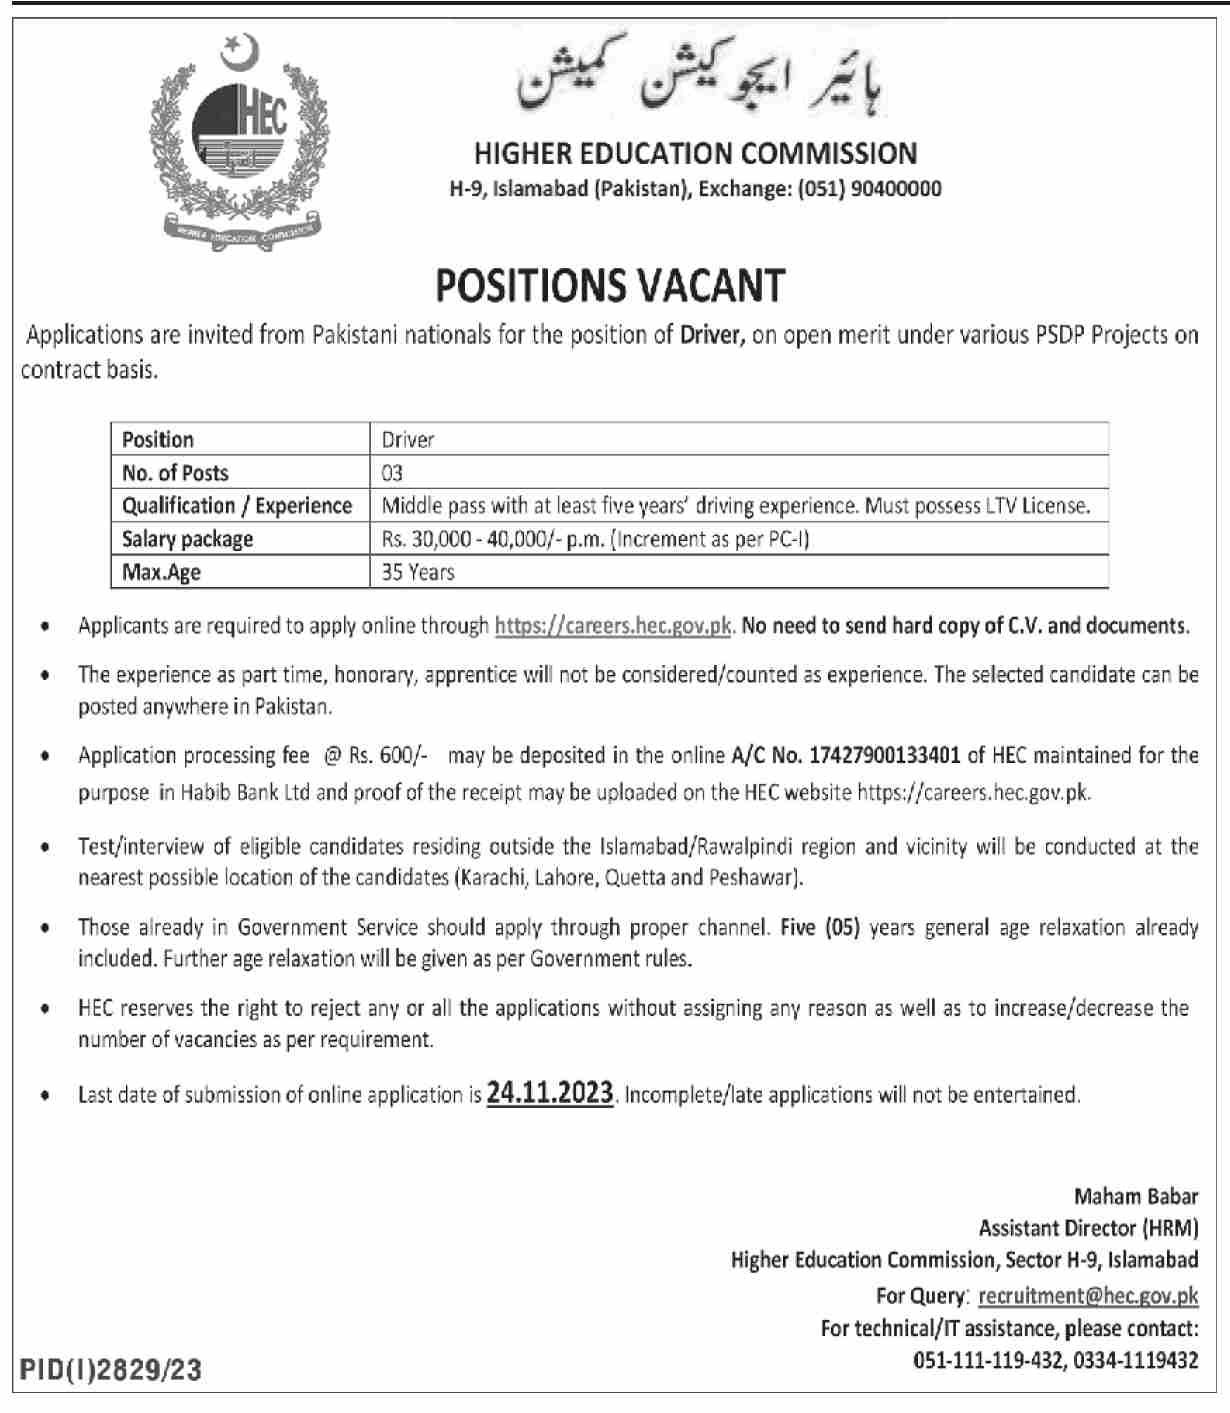 Higher Education Commission HEC Jobs 2023 Positions Vacant